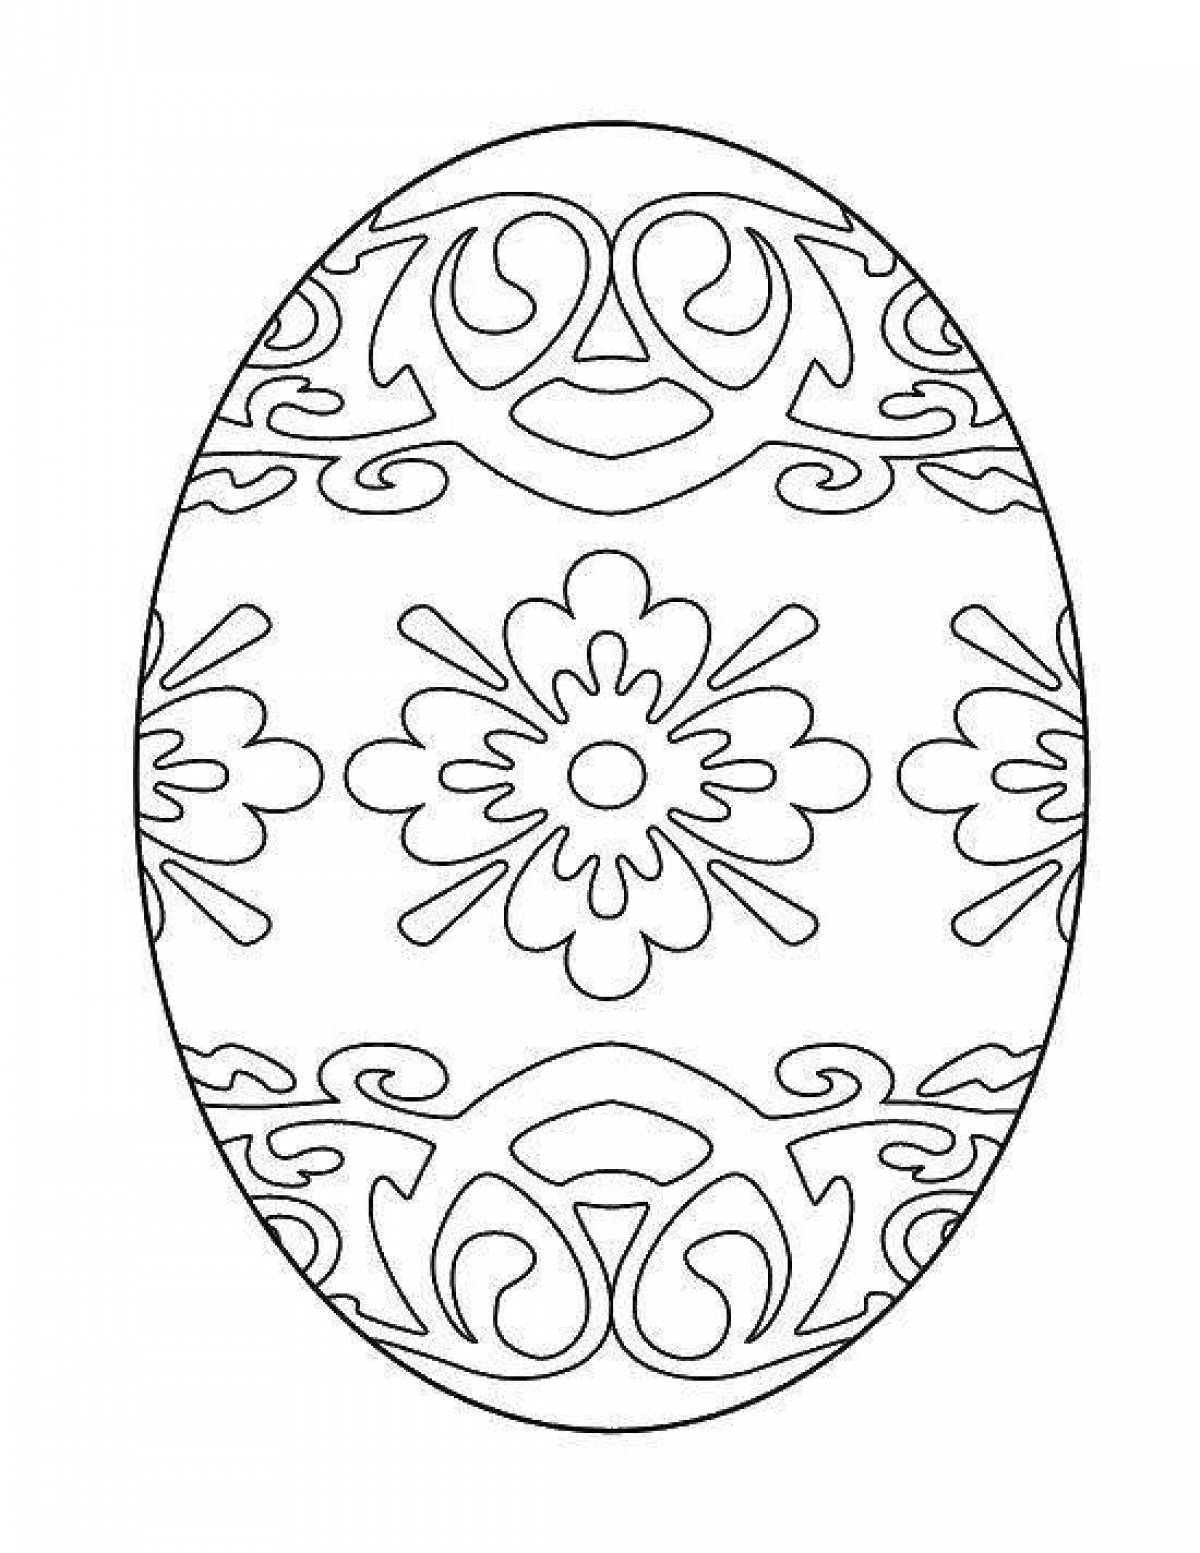 Fairy easter egg coloring page